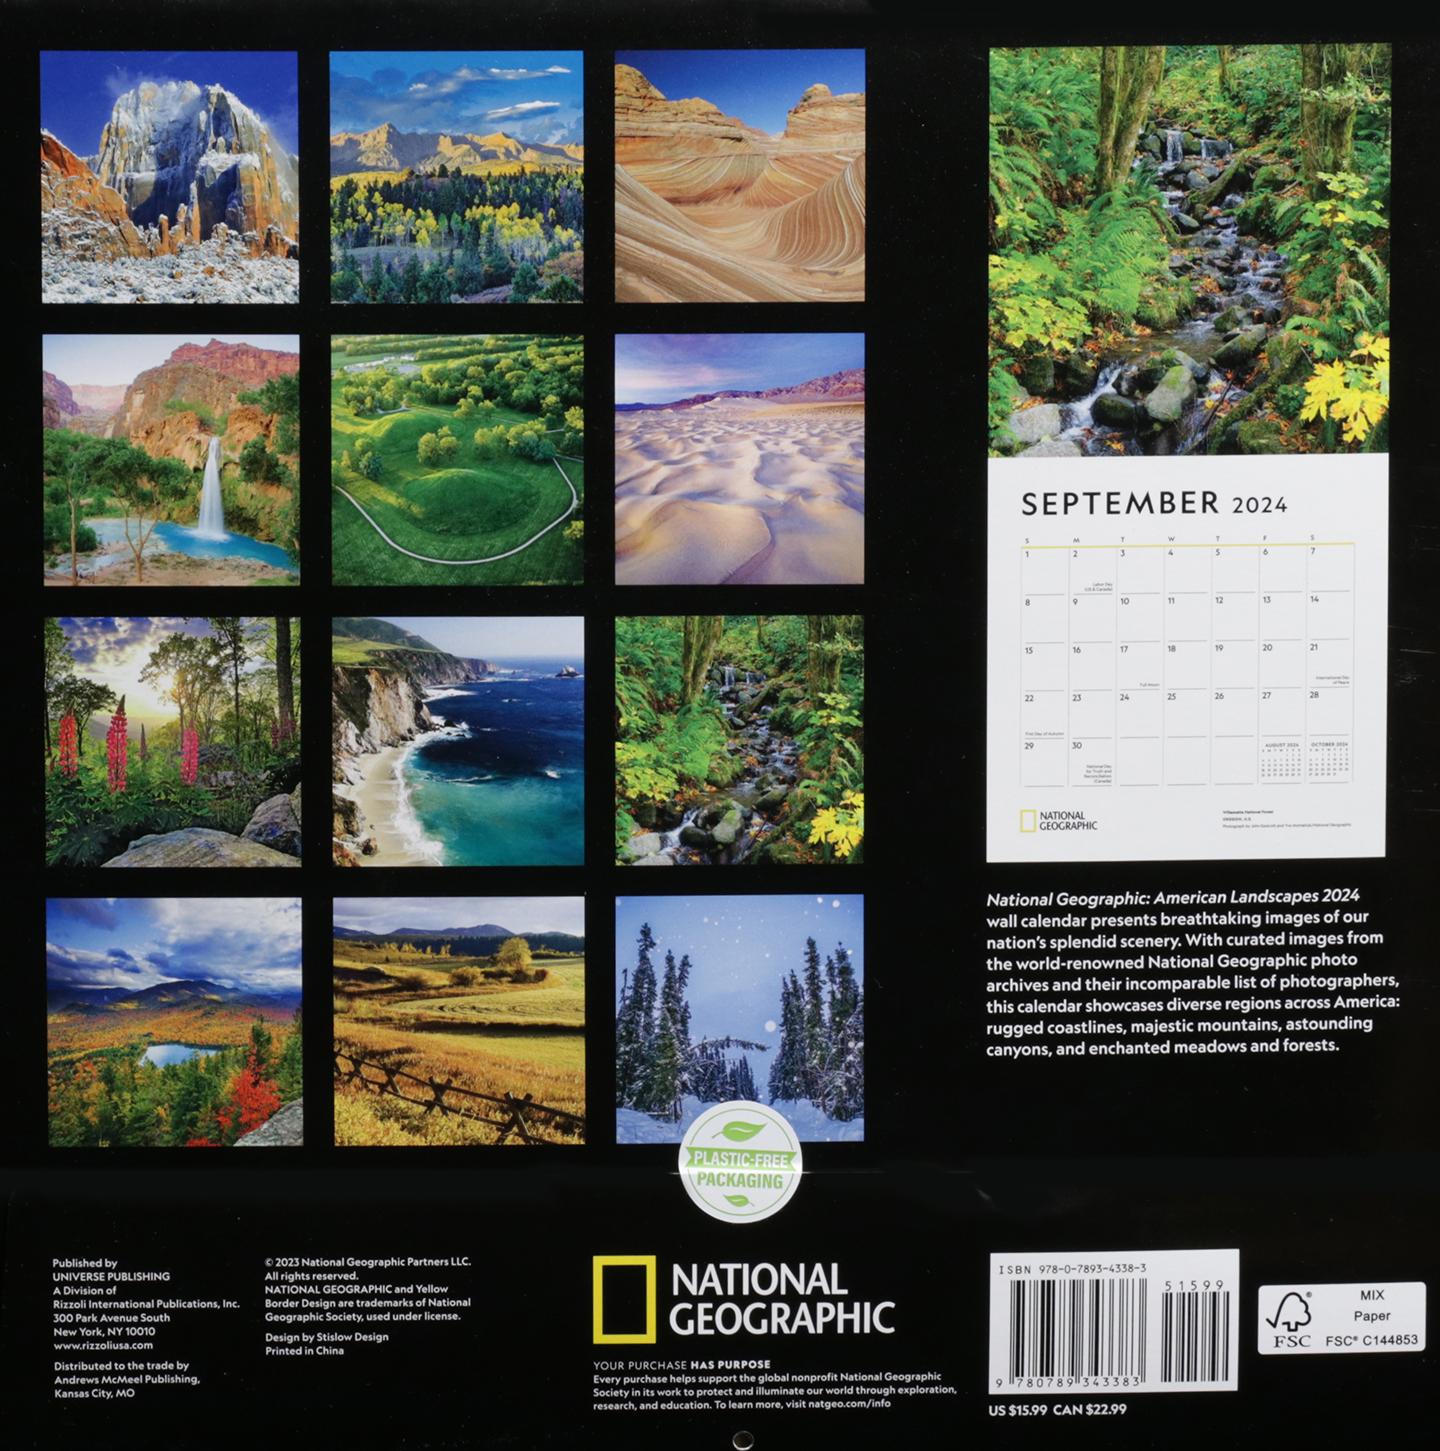 2024 NATIONAL GEOGRAPHIC AMERICAN LANDSCAPES CALENDAR